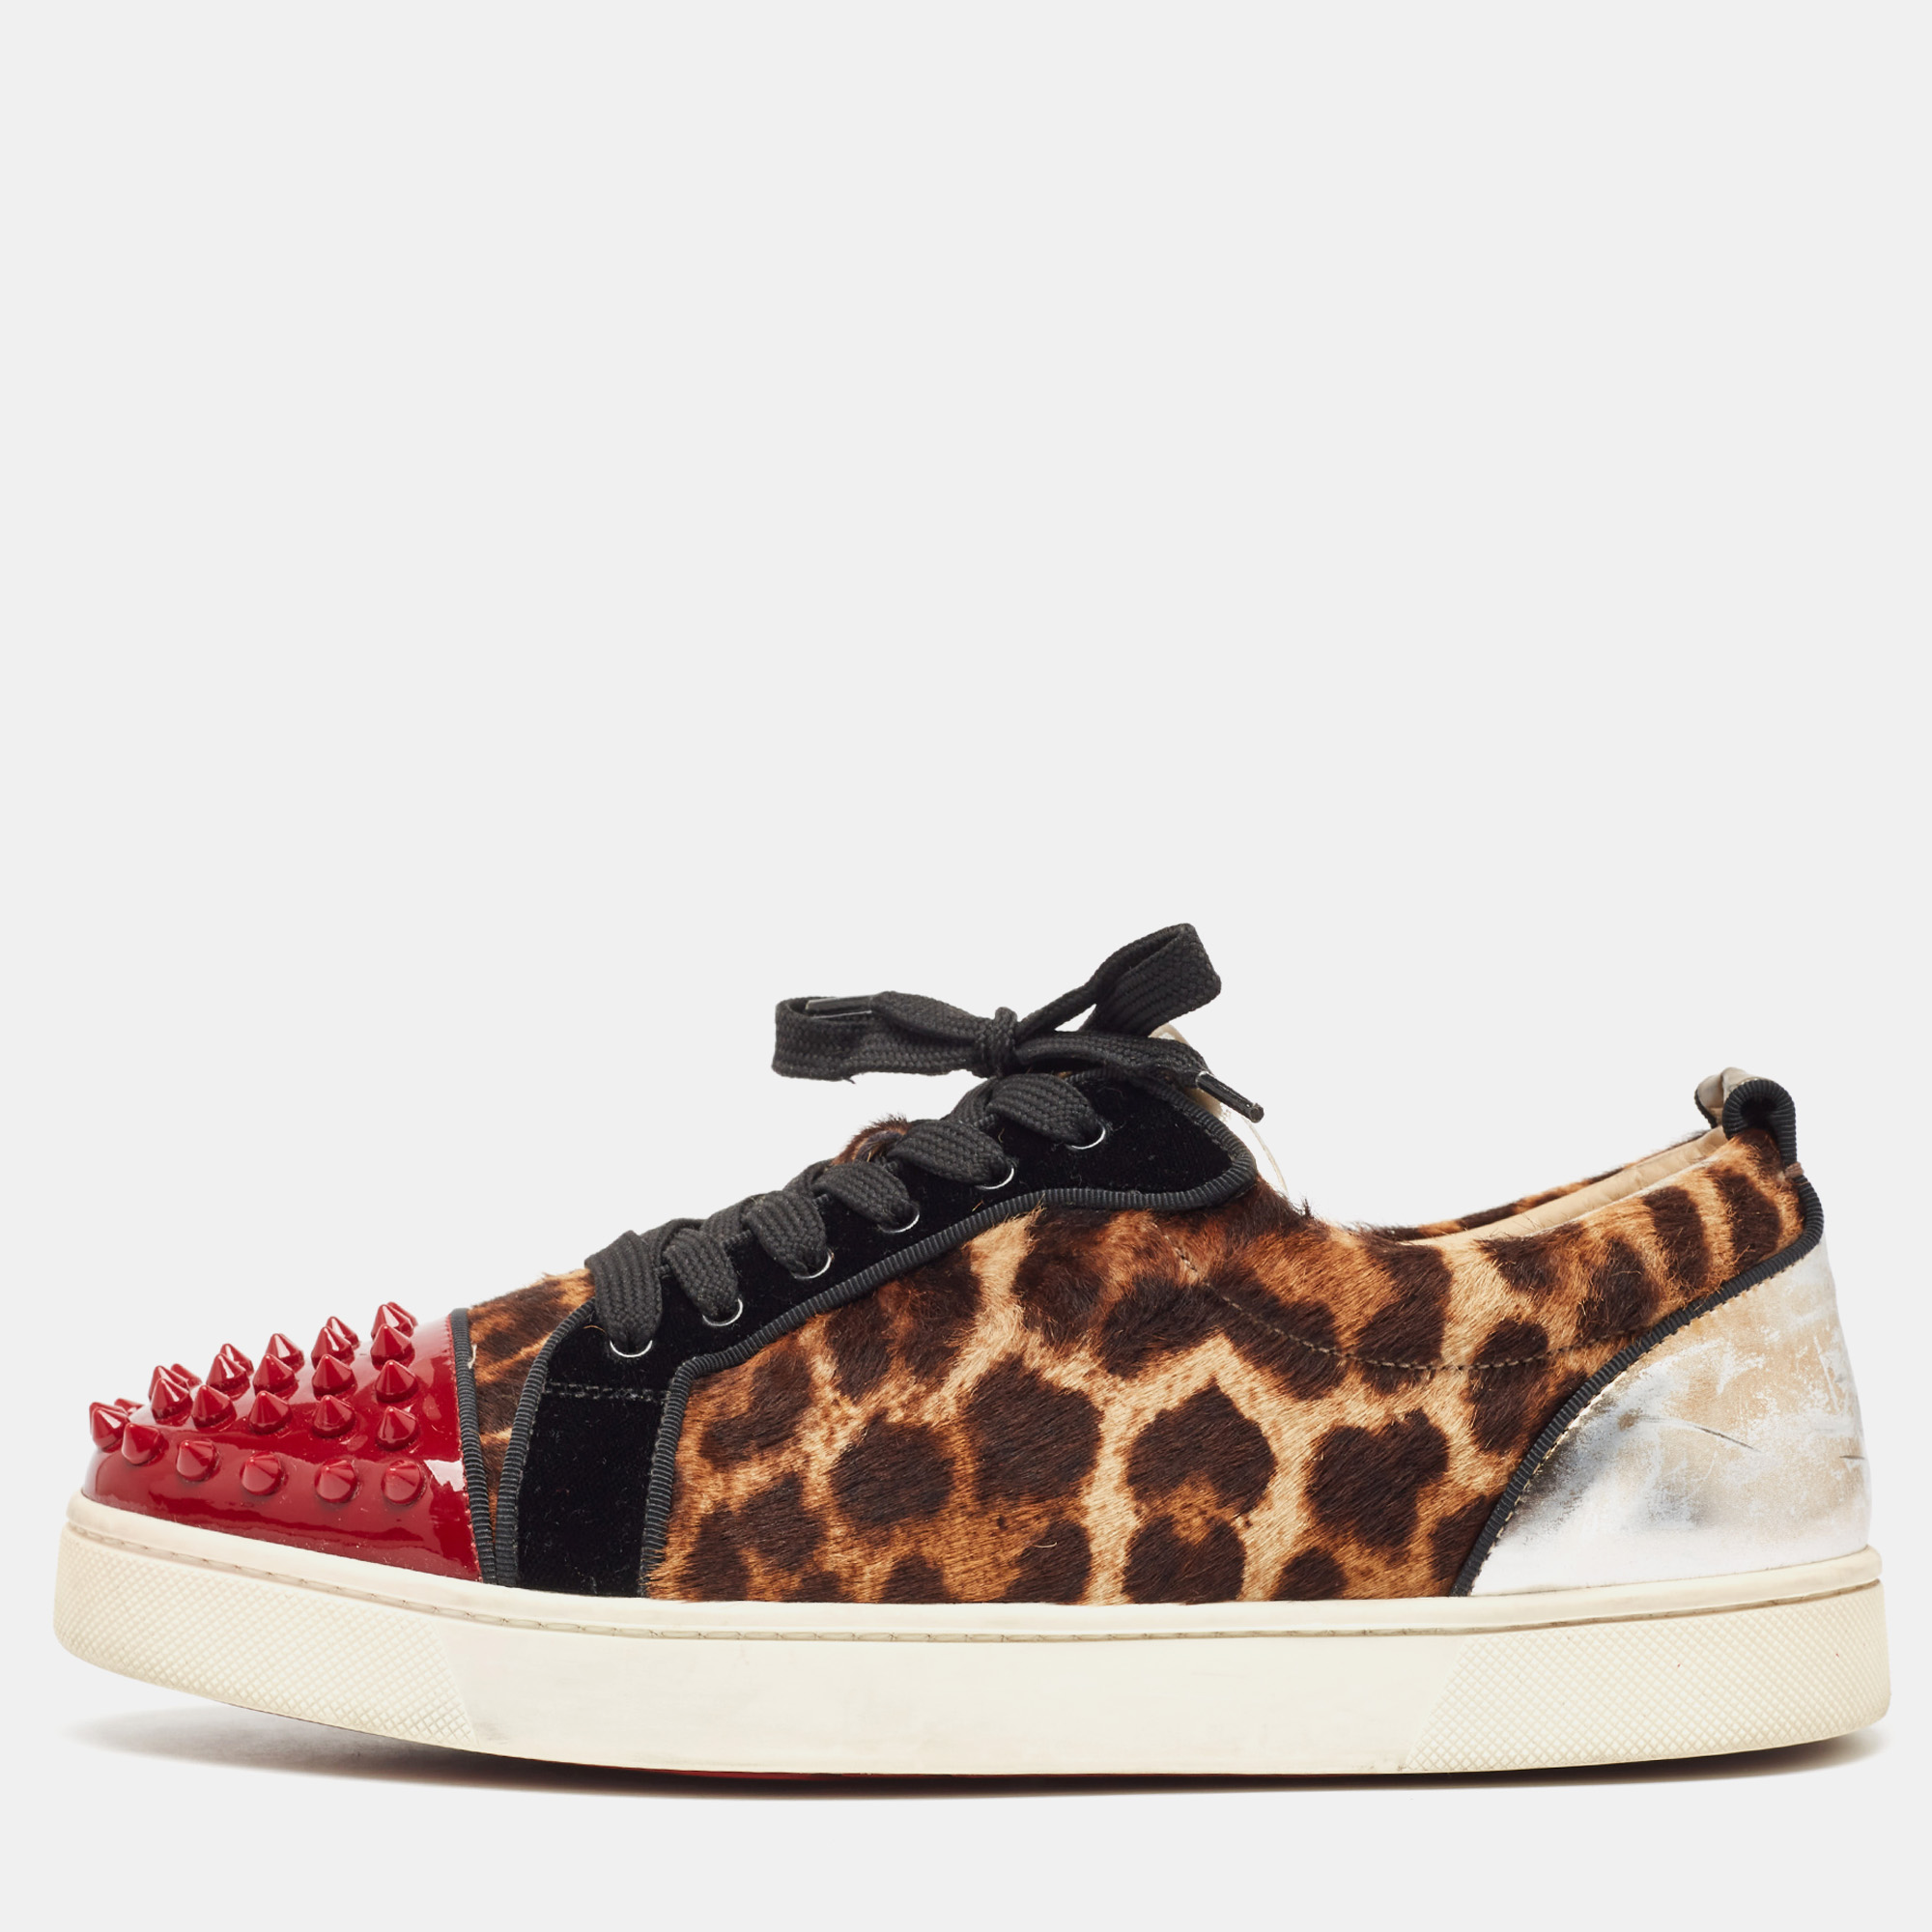 

Christian Louboutin Multicolor Calf Hair and Leather Low Top Sneakers Size